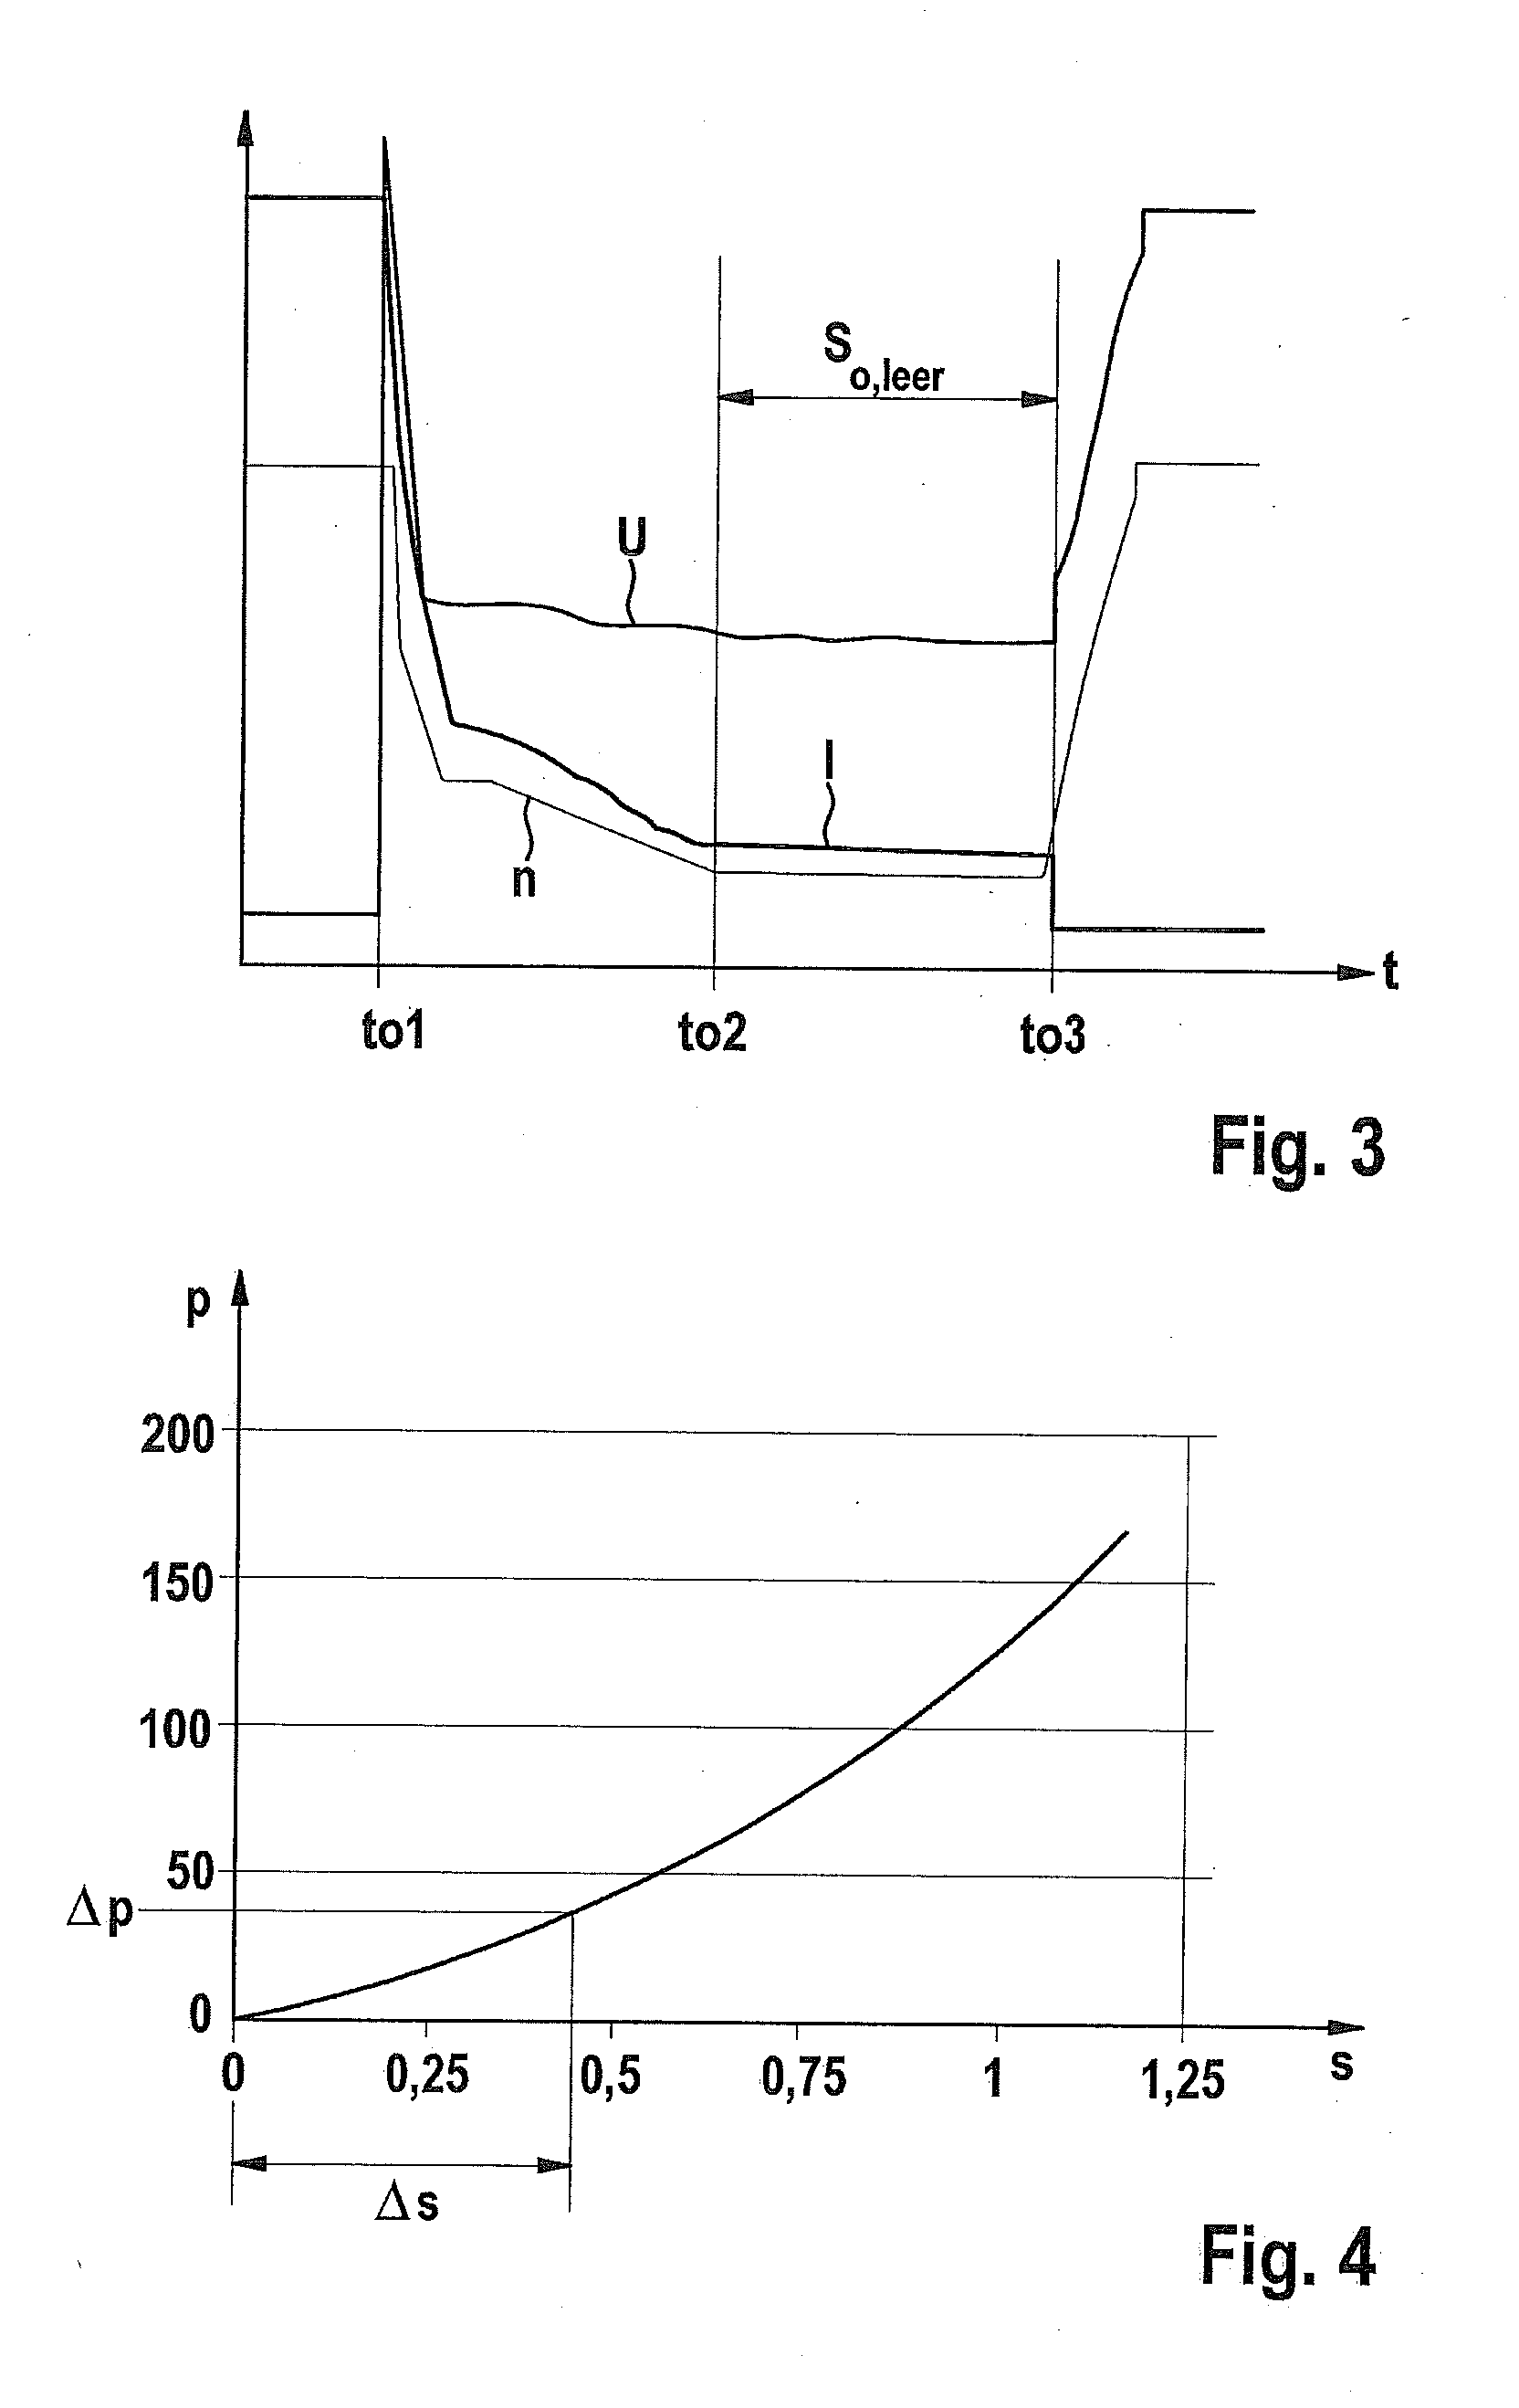 Method for setting the actuating force applied by a parking brake